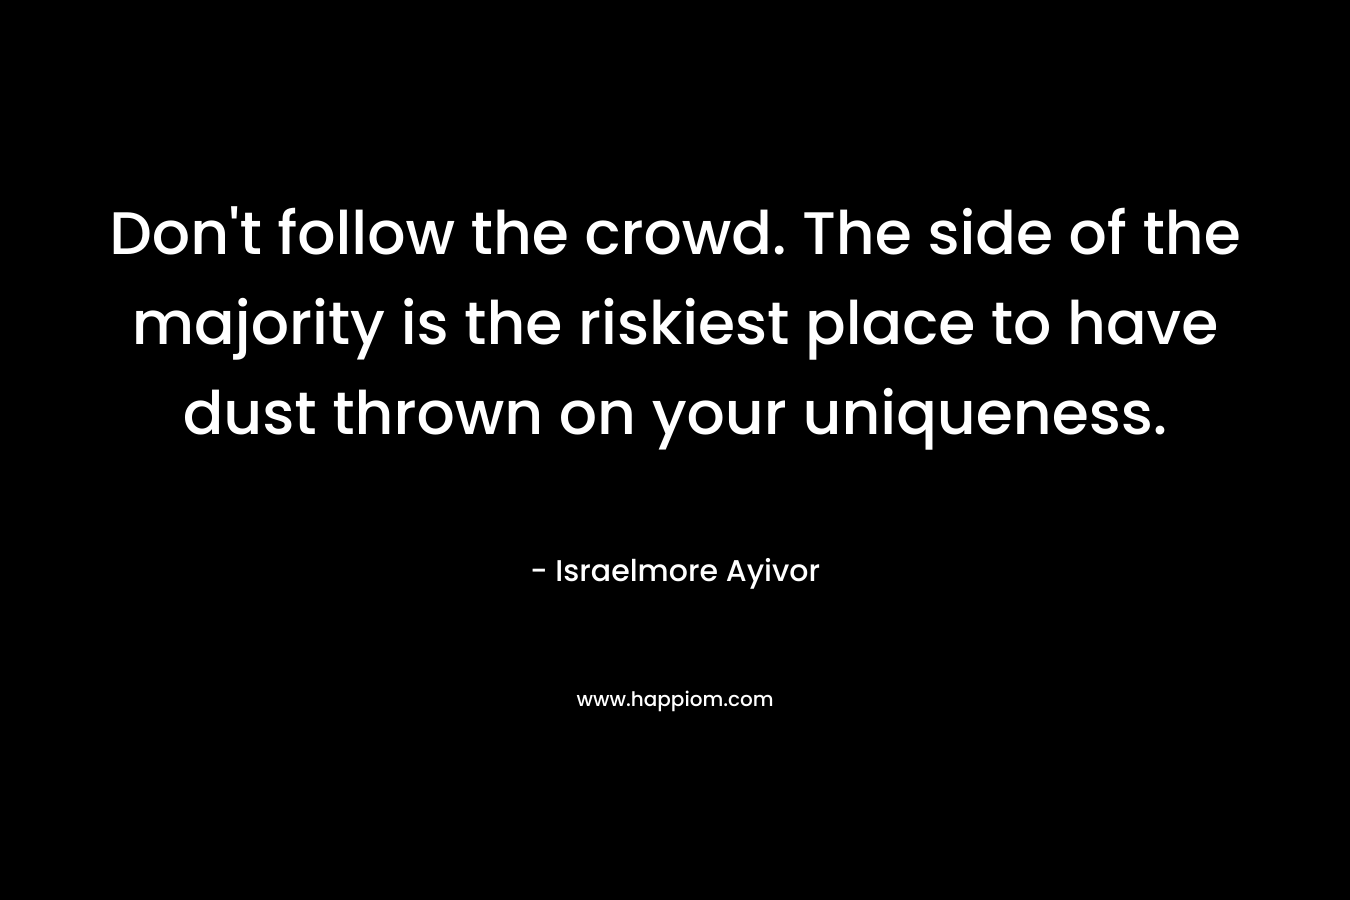 Don't follow the crowd. The side of the majority is the riskiest place to have dust thrown on your uniqueness.